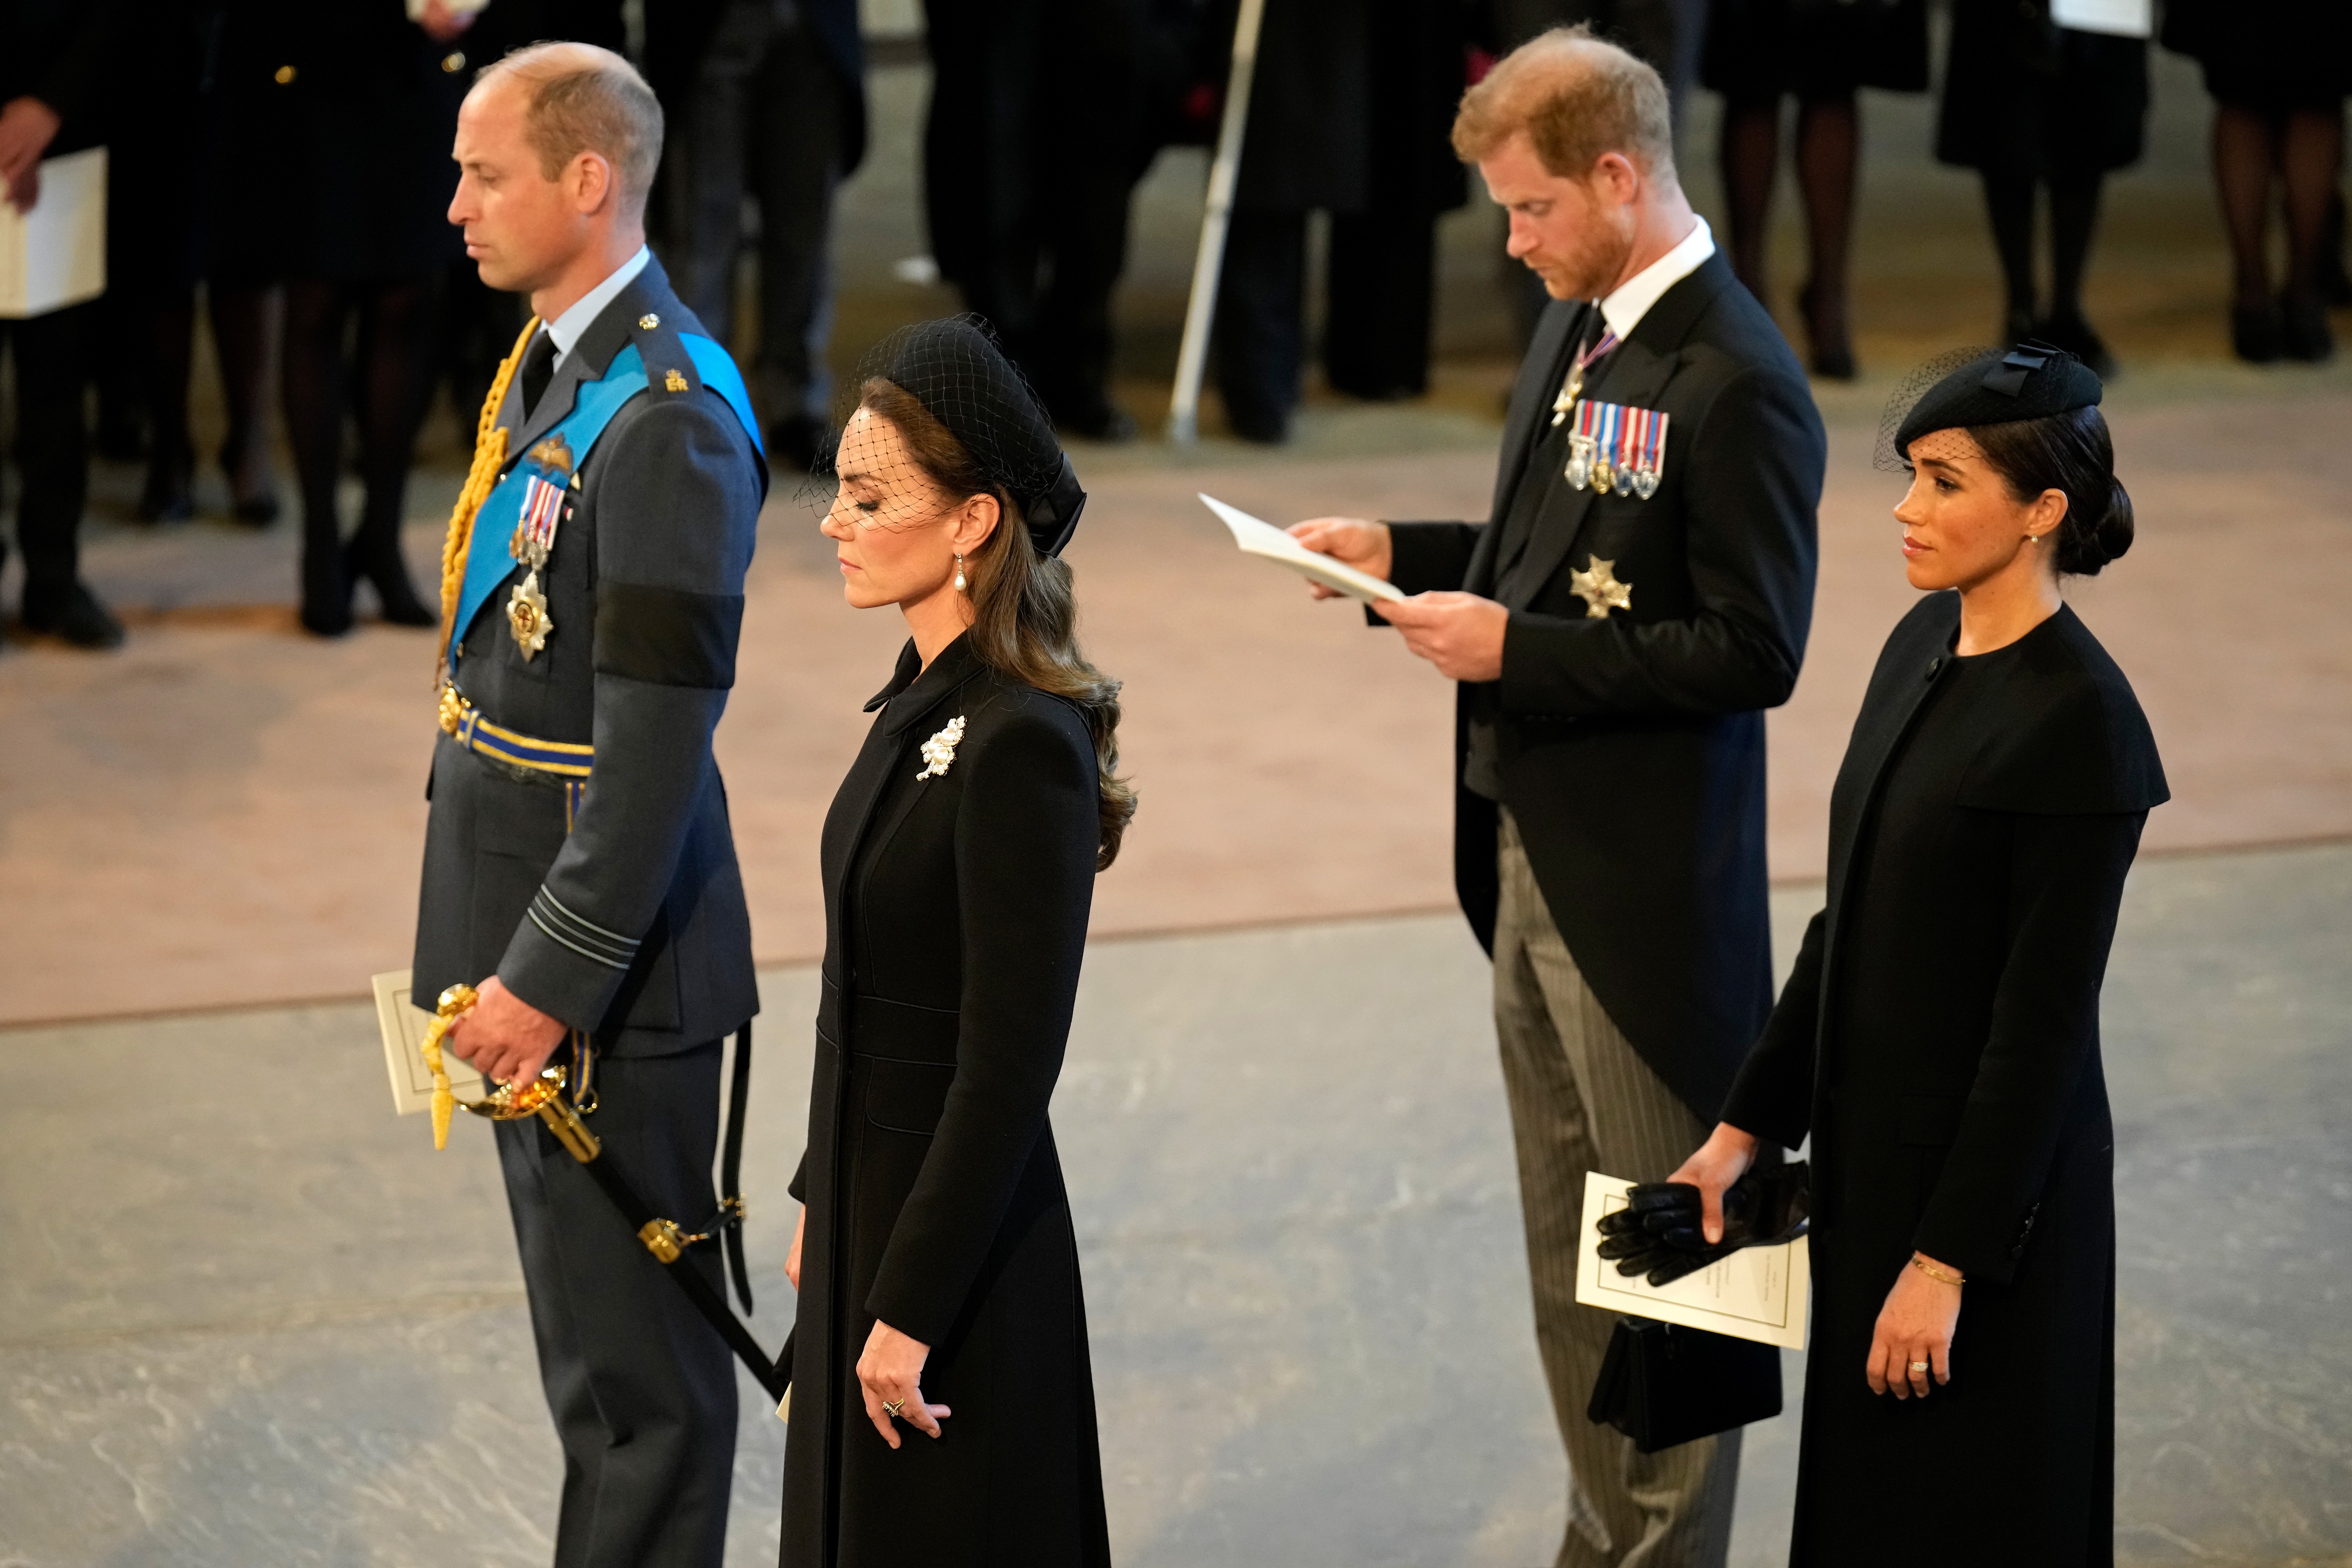 Prince William, Prince of Wales, Catherine, Princess of Wales, Prince Harry, Duke of Sussex and Meghan, Duchess of Sussex seen inside the Palace of Westminster during the Lying-in State of Queen Elizabeth II on September 14, 2022 in London, England | Source: Getty Images 